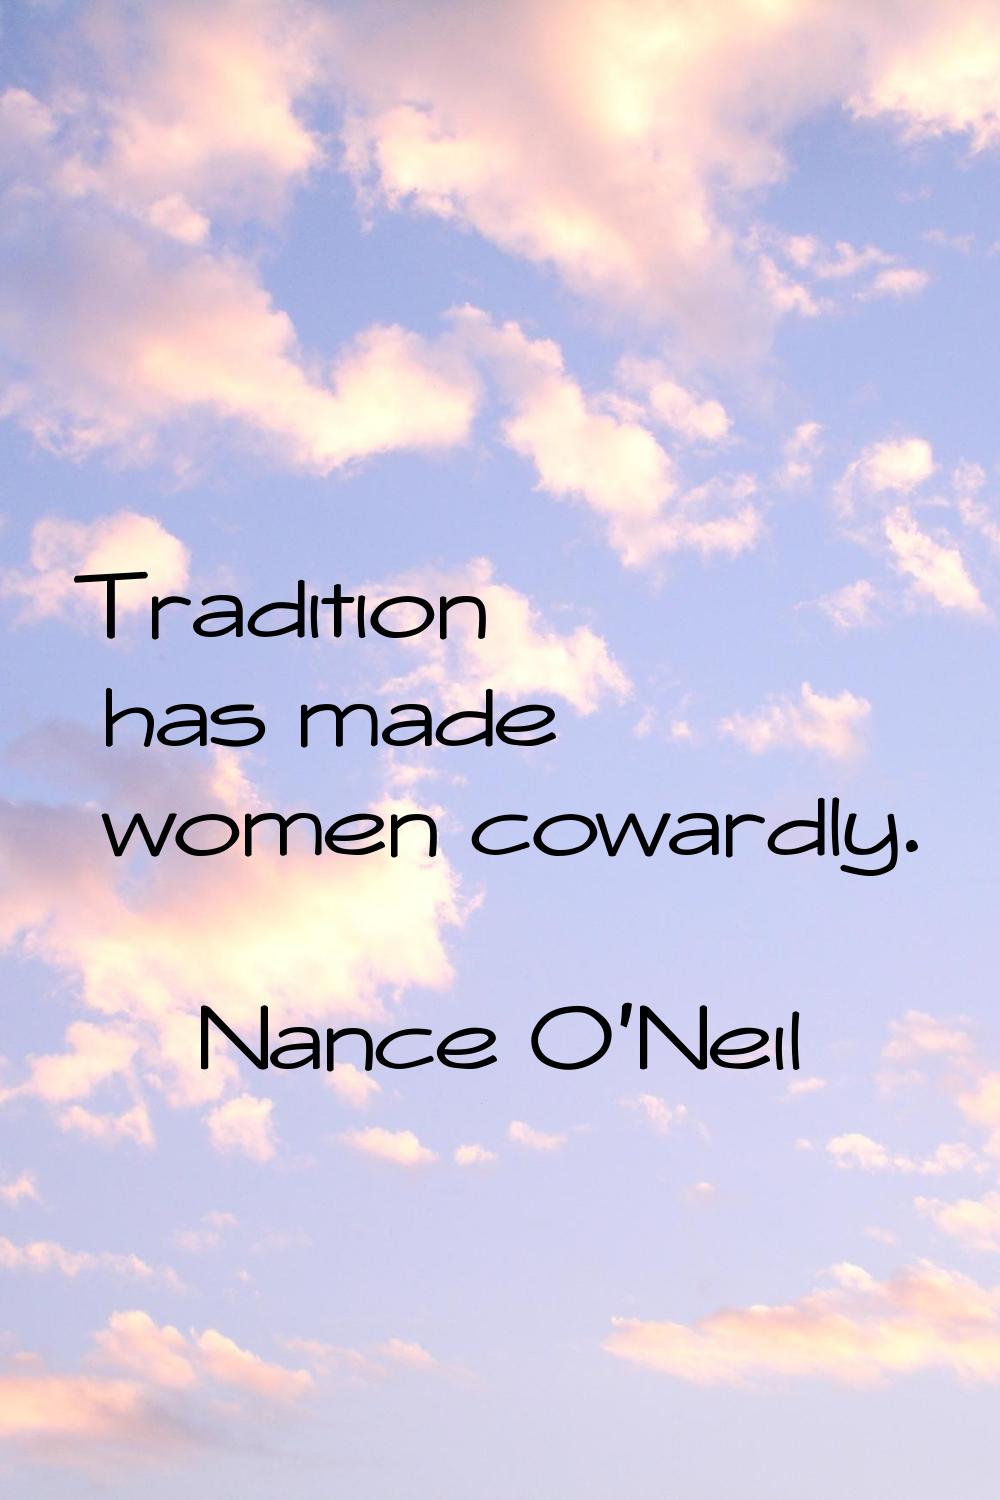 Tradition has made women cowardly.